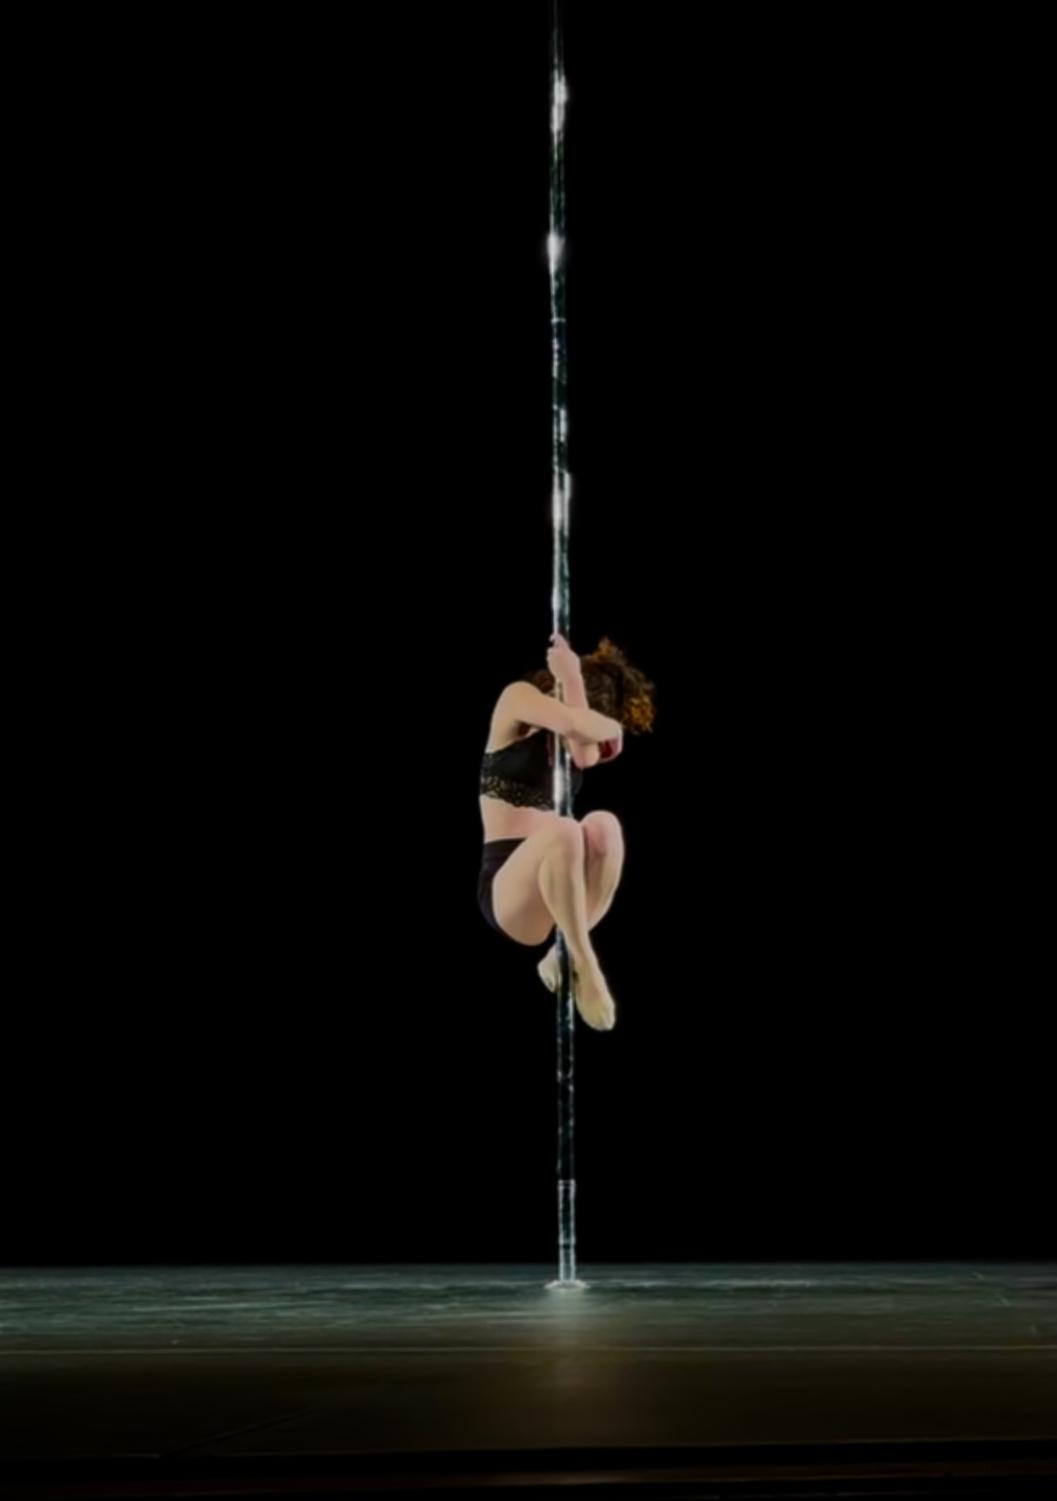 Pin by Beatriz Bellatto on pole  Pole dance moves, Pole fitness moves, Pole  dancing